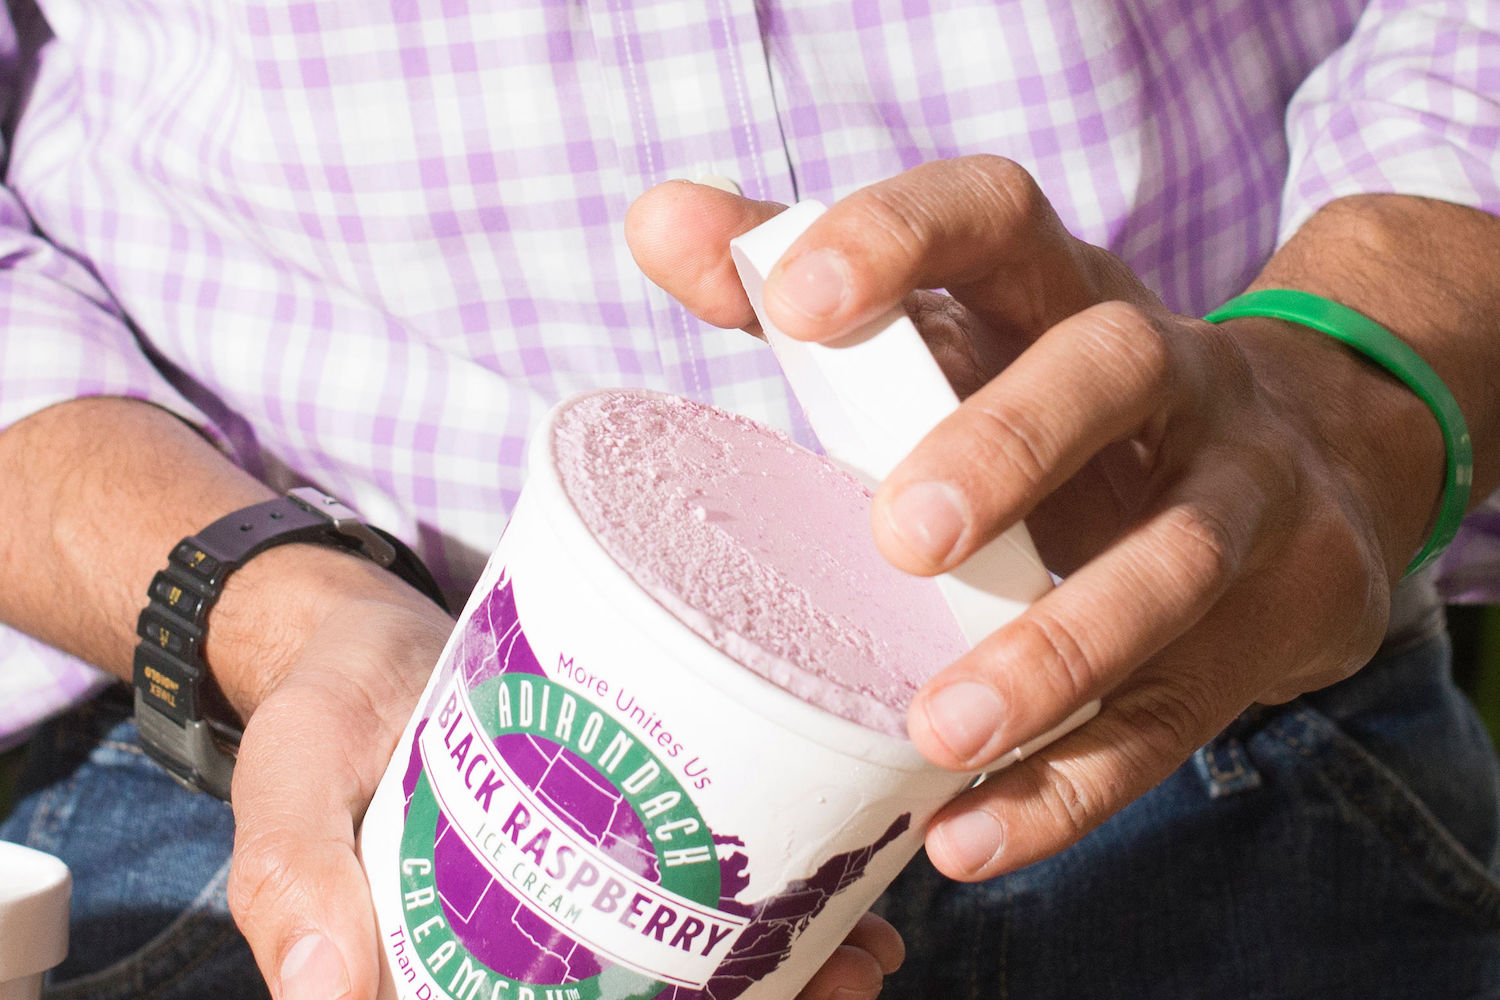 Adirondack Creamery is not just an ice cream producer in Upstate New York.